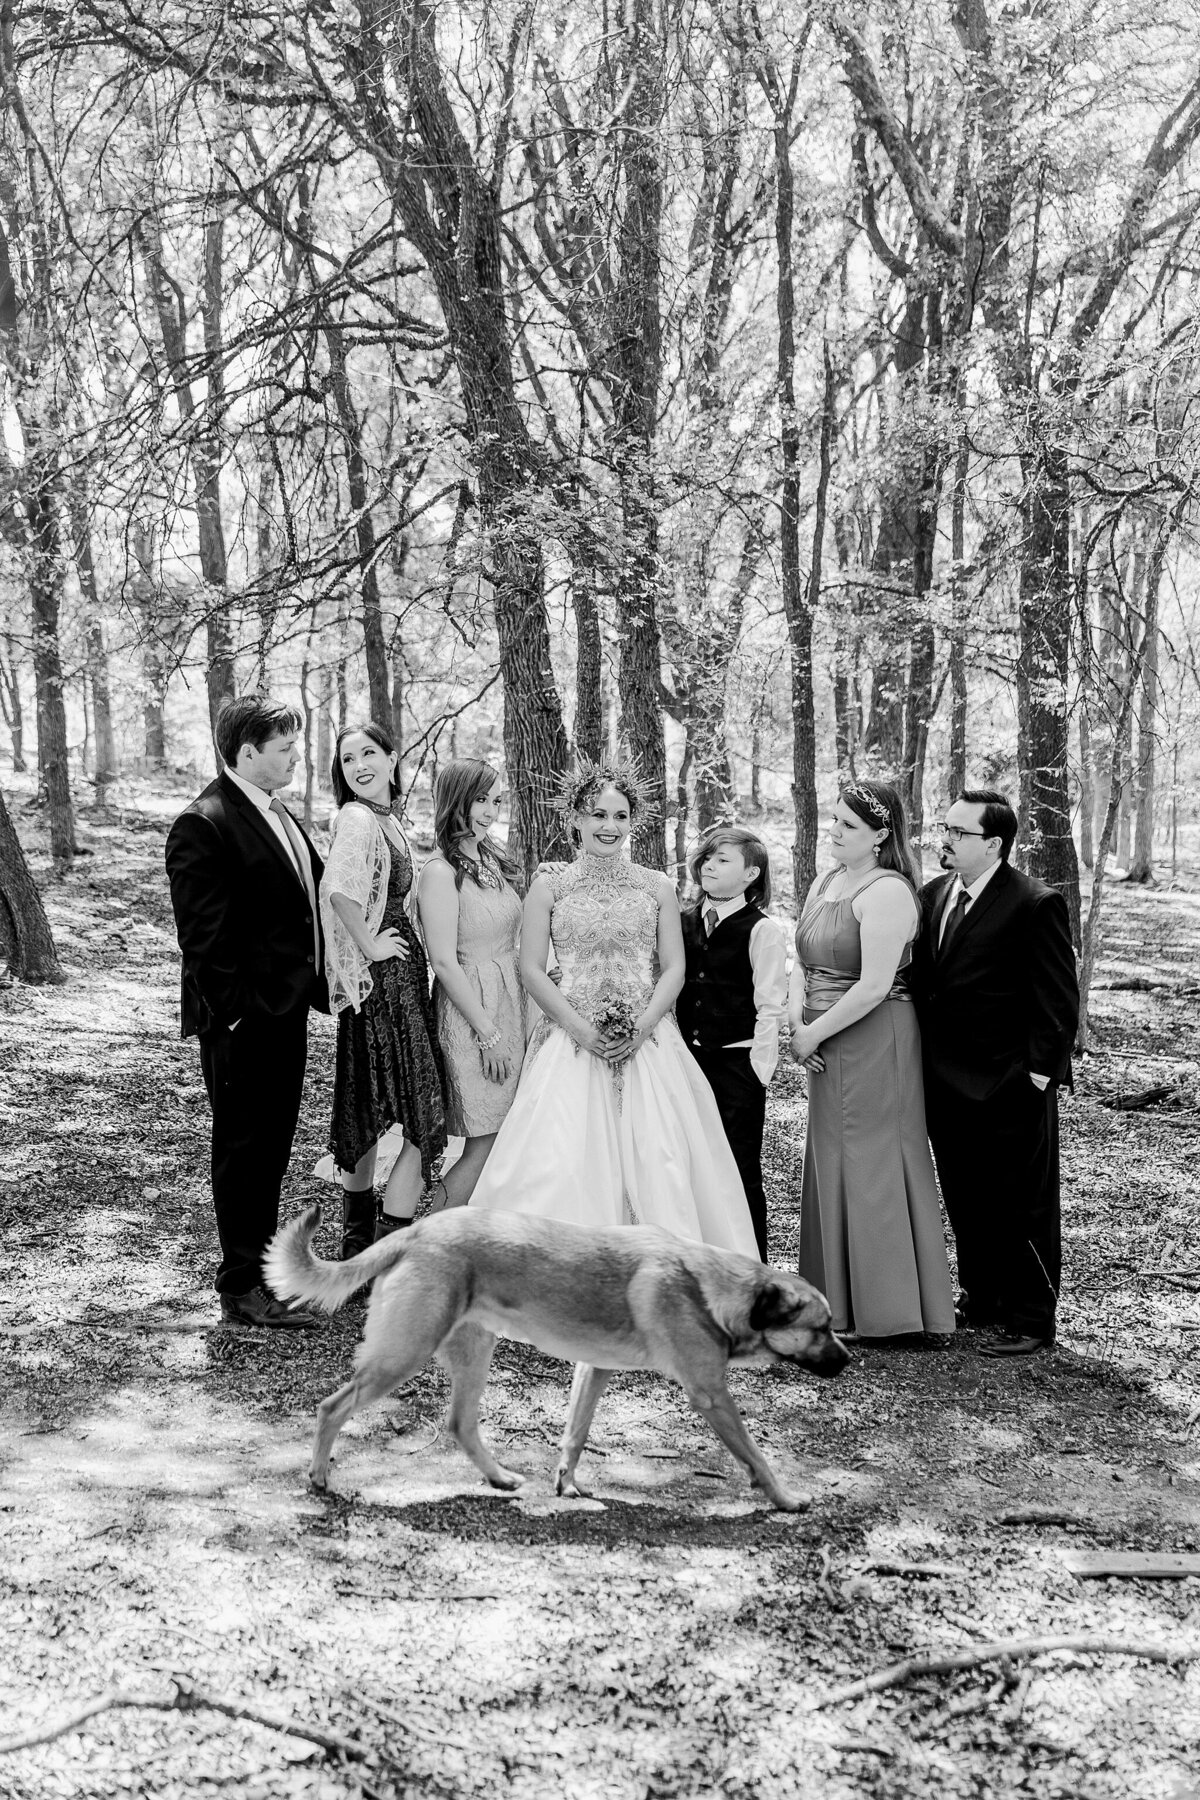 A black and white portrait of a bride, her dog, and her wedding party as posing together in the woods on her wedding day in Fort Worth, Texas. The pose is very casual with some people smiling, other looking at each other, looking at the bride, etc. The bride stands in the center and is wearing an elaborate, very intricate dress and crown while holding a bouquet. The wedding party is wearing varying dresses and suits.